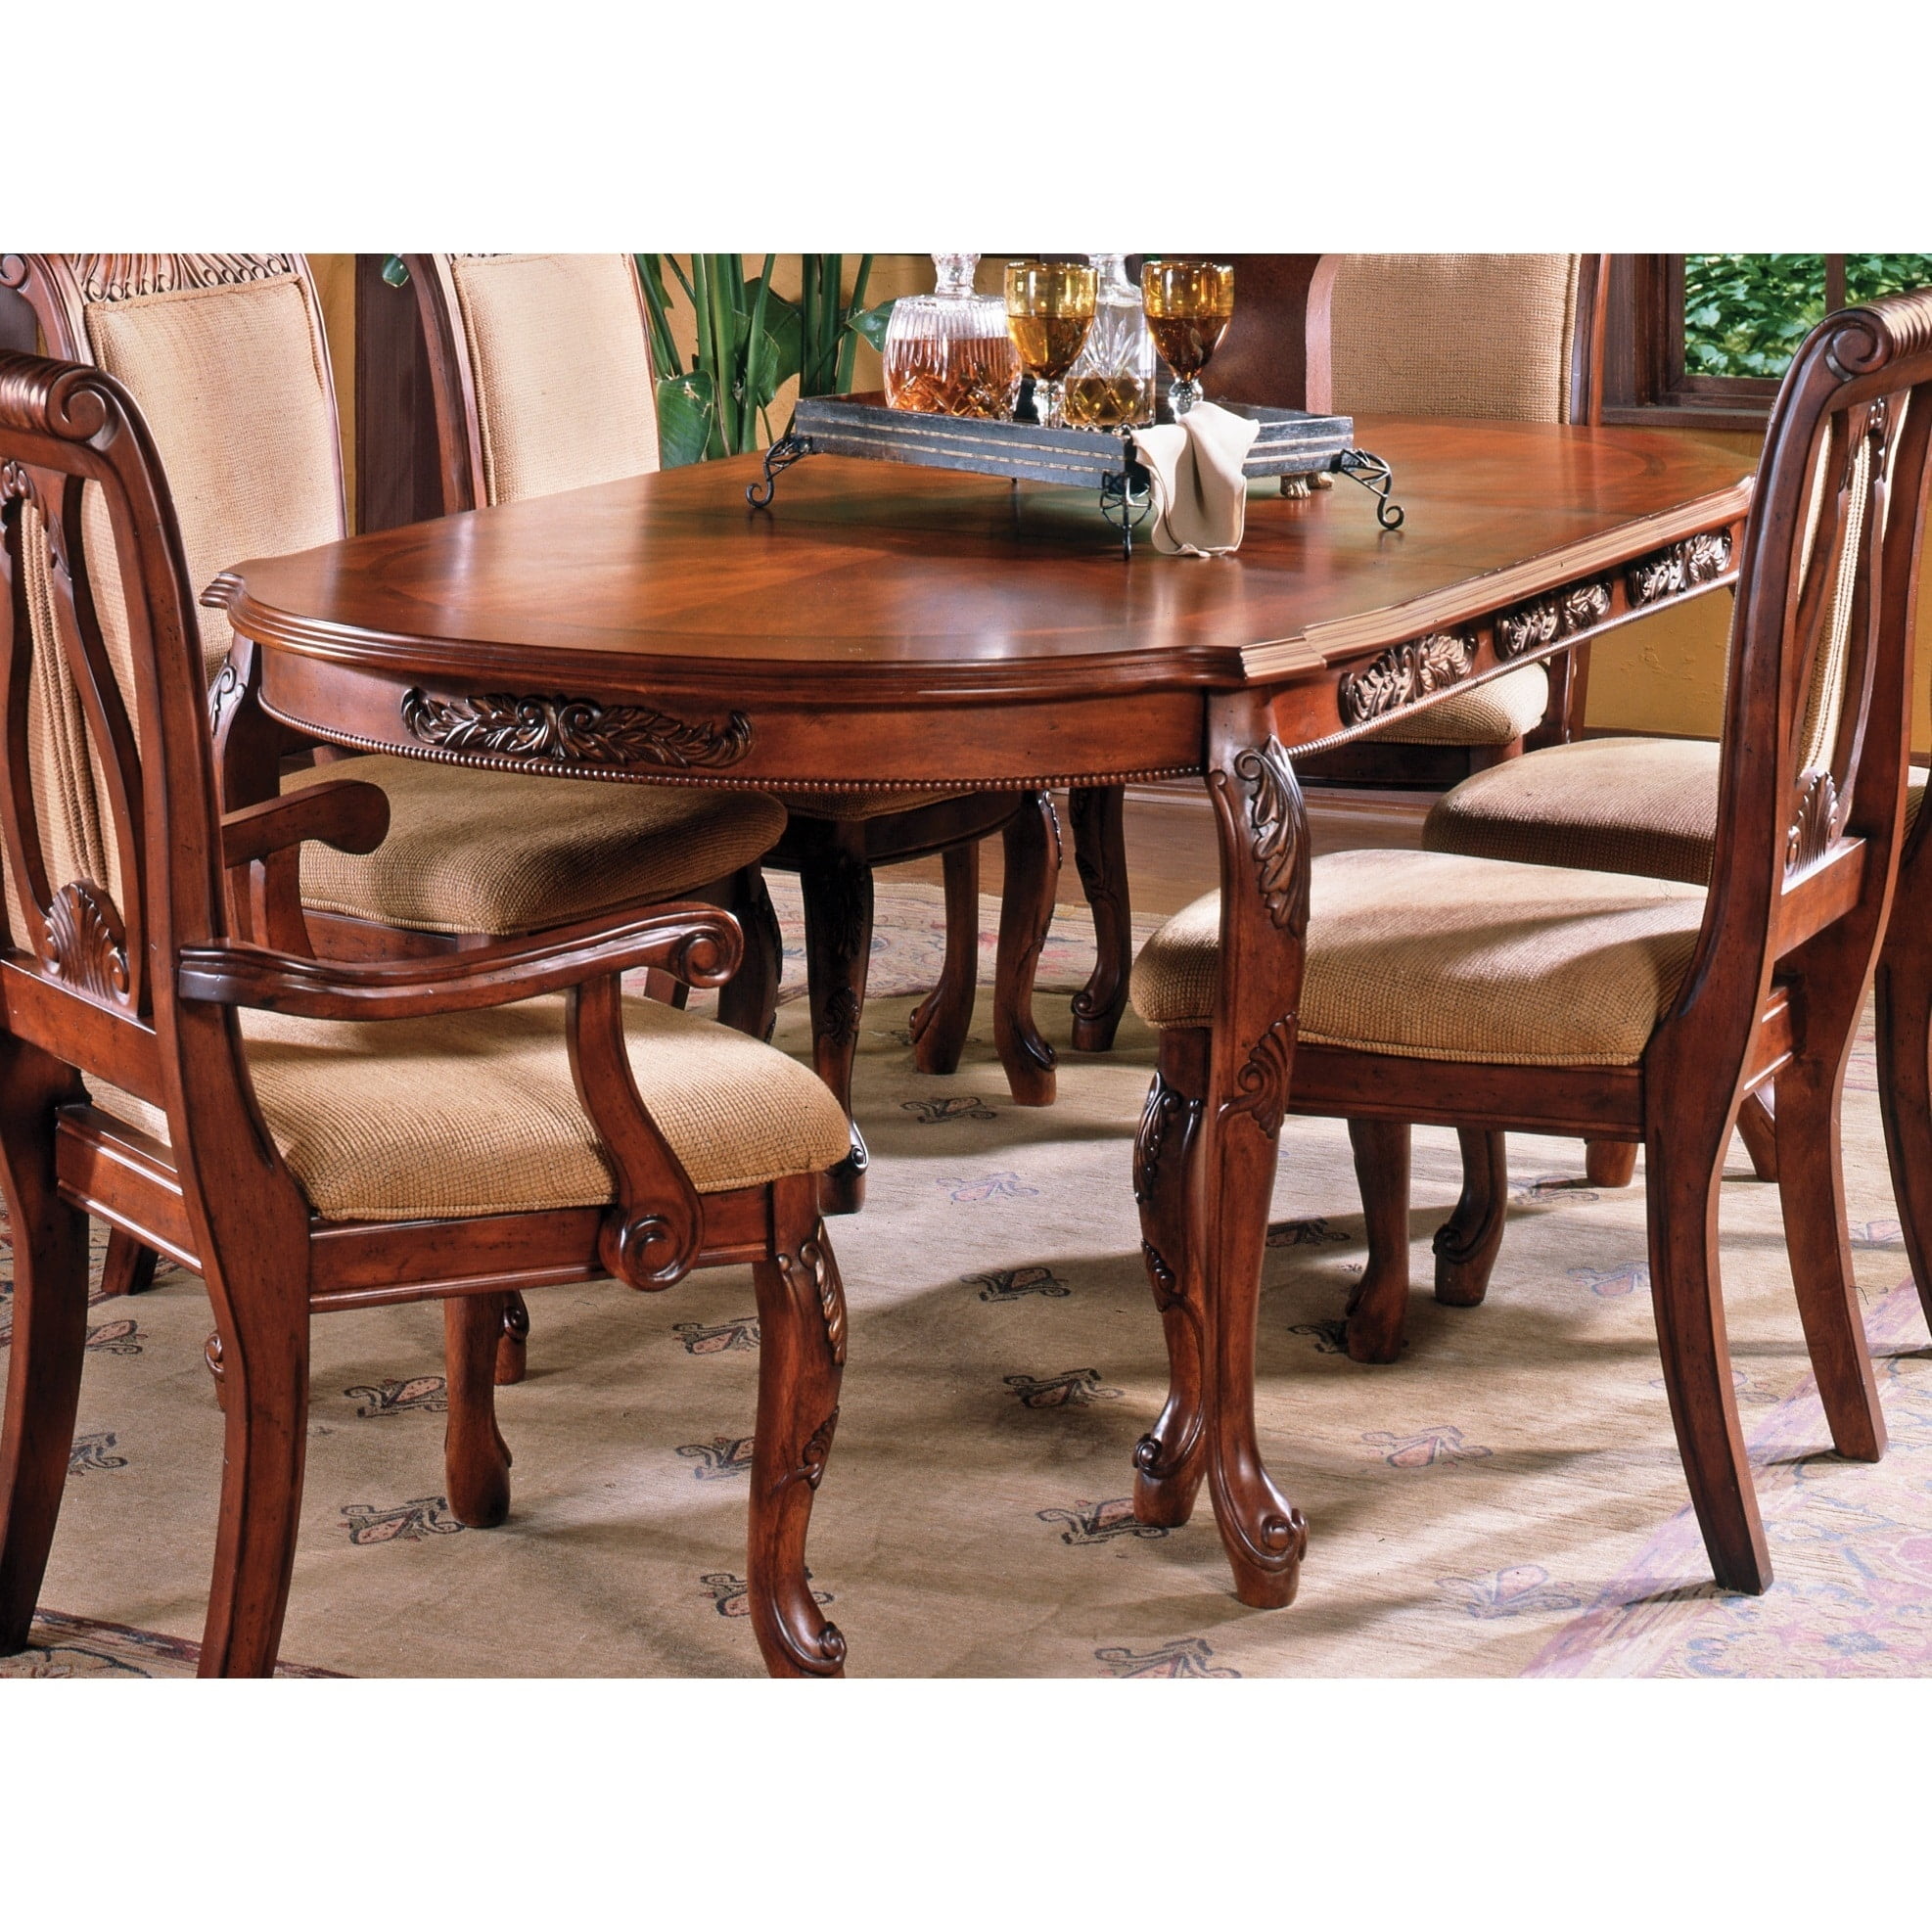 Greyson Living Melodie Cherry Finish 84 Inch Dining Table By Walmartcom Walmartcom